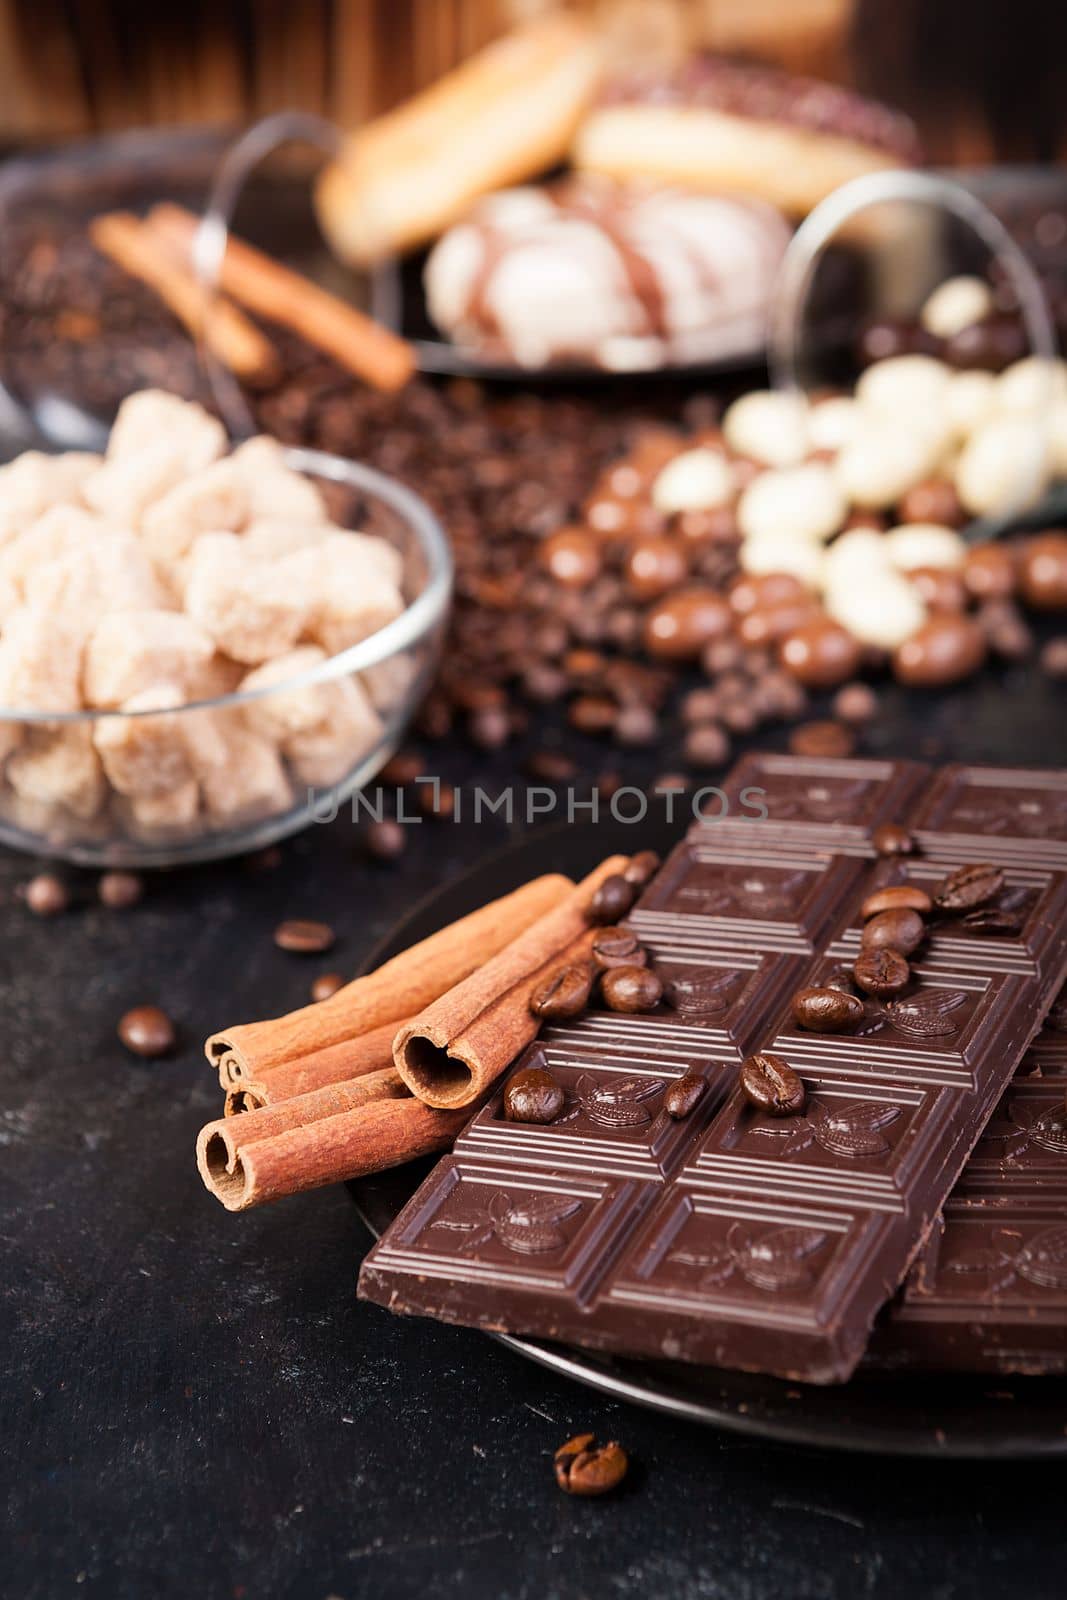 Chocolate tablets next to cinnamon rolls and other sweets and candies by DCStudio